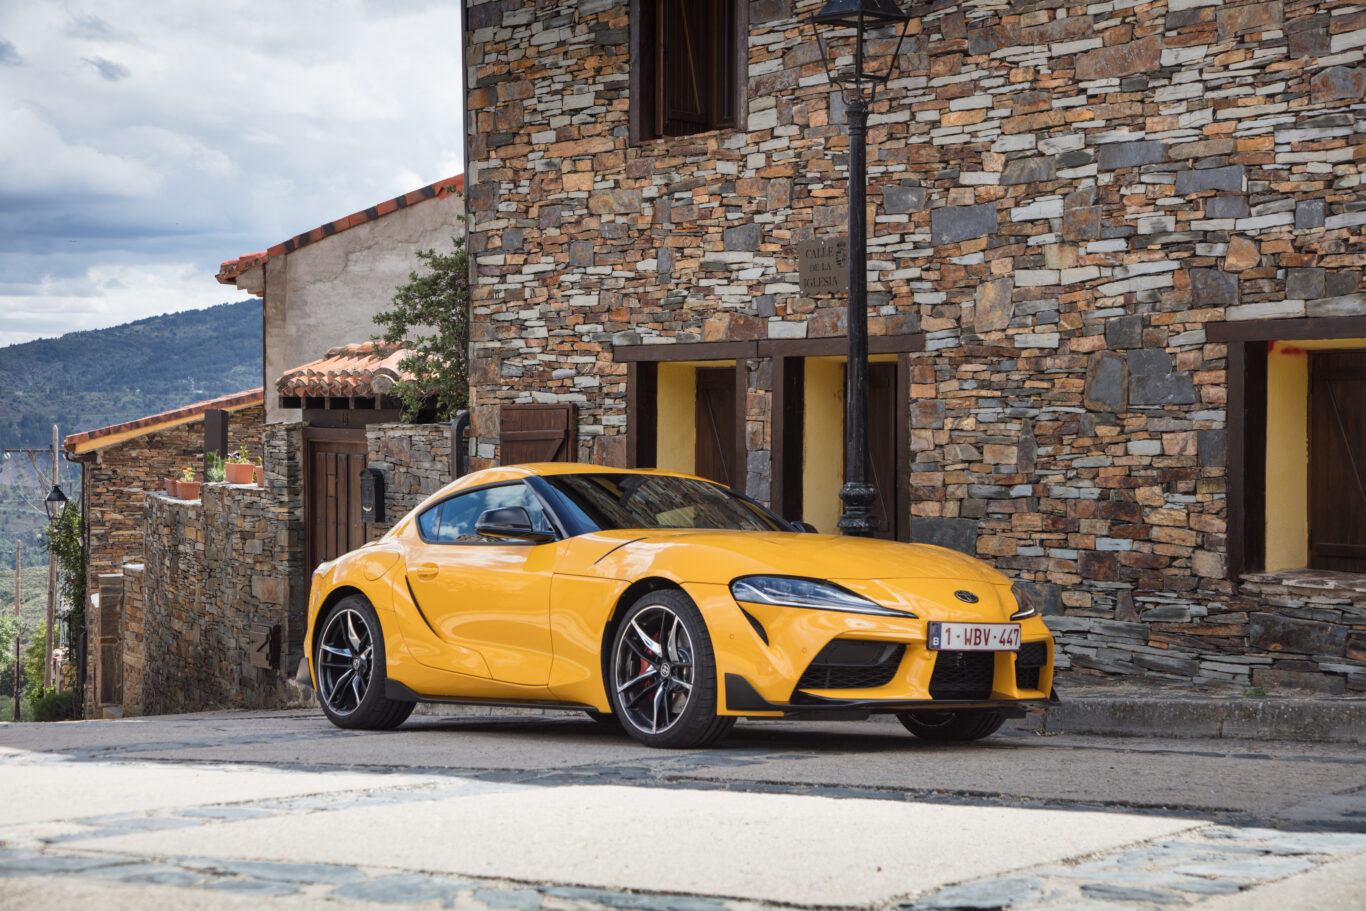 The Supra sits on the same platform as the BMW Z4